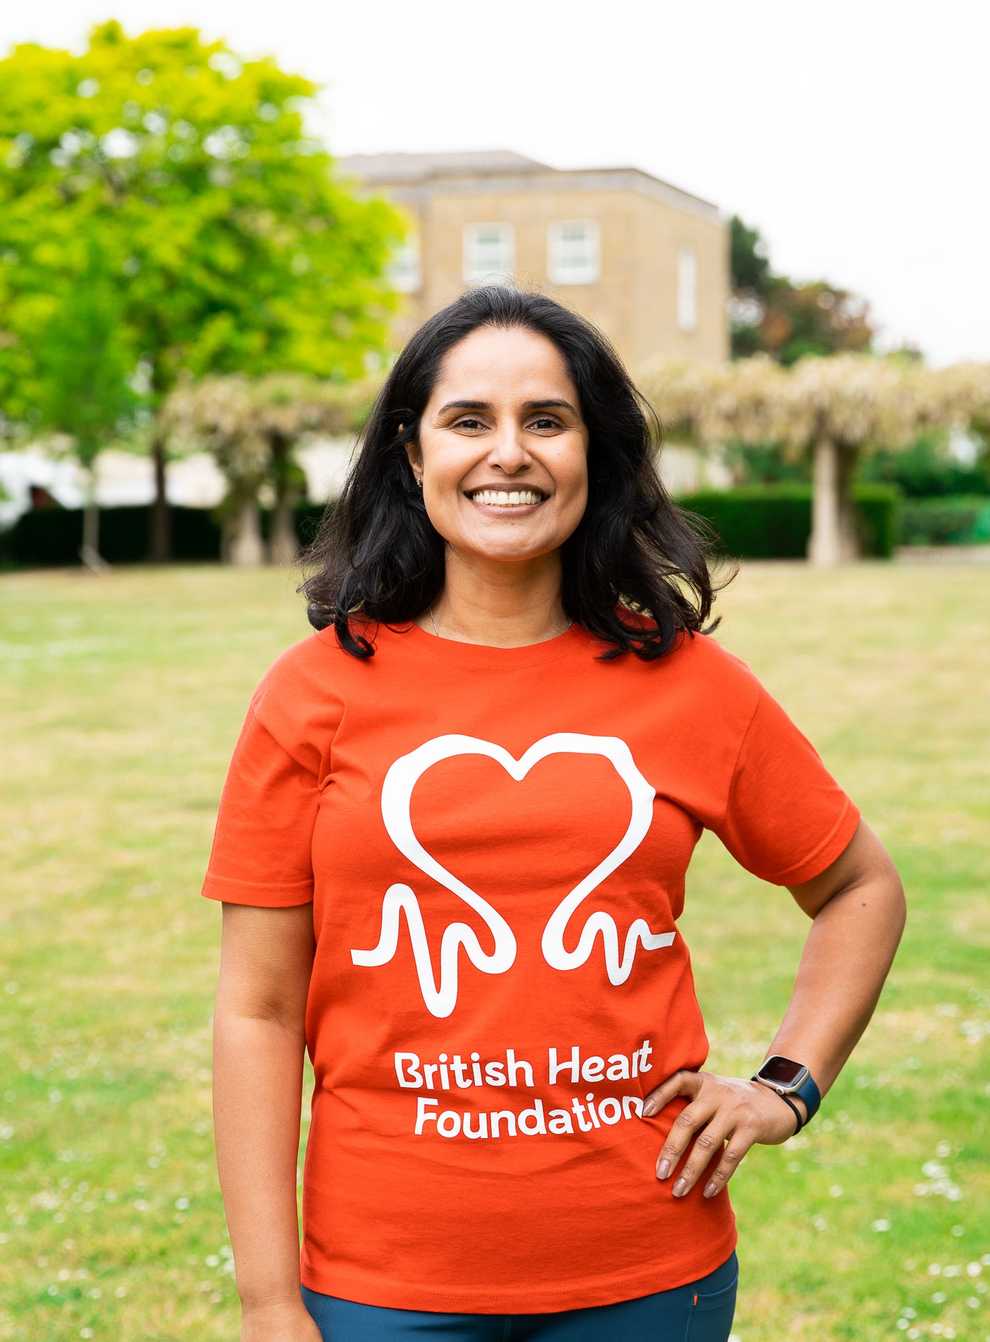 Navinder Molyneux is running the TCS London Marathon on Sunday to raise money for the British Heart Foundation in memory of her father who died 10 years ago from heart failure (Oliver Holder/BHF/PA)